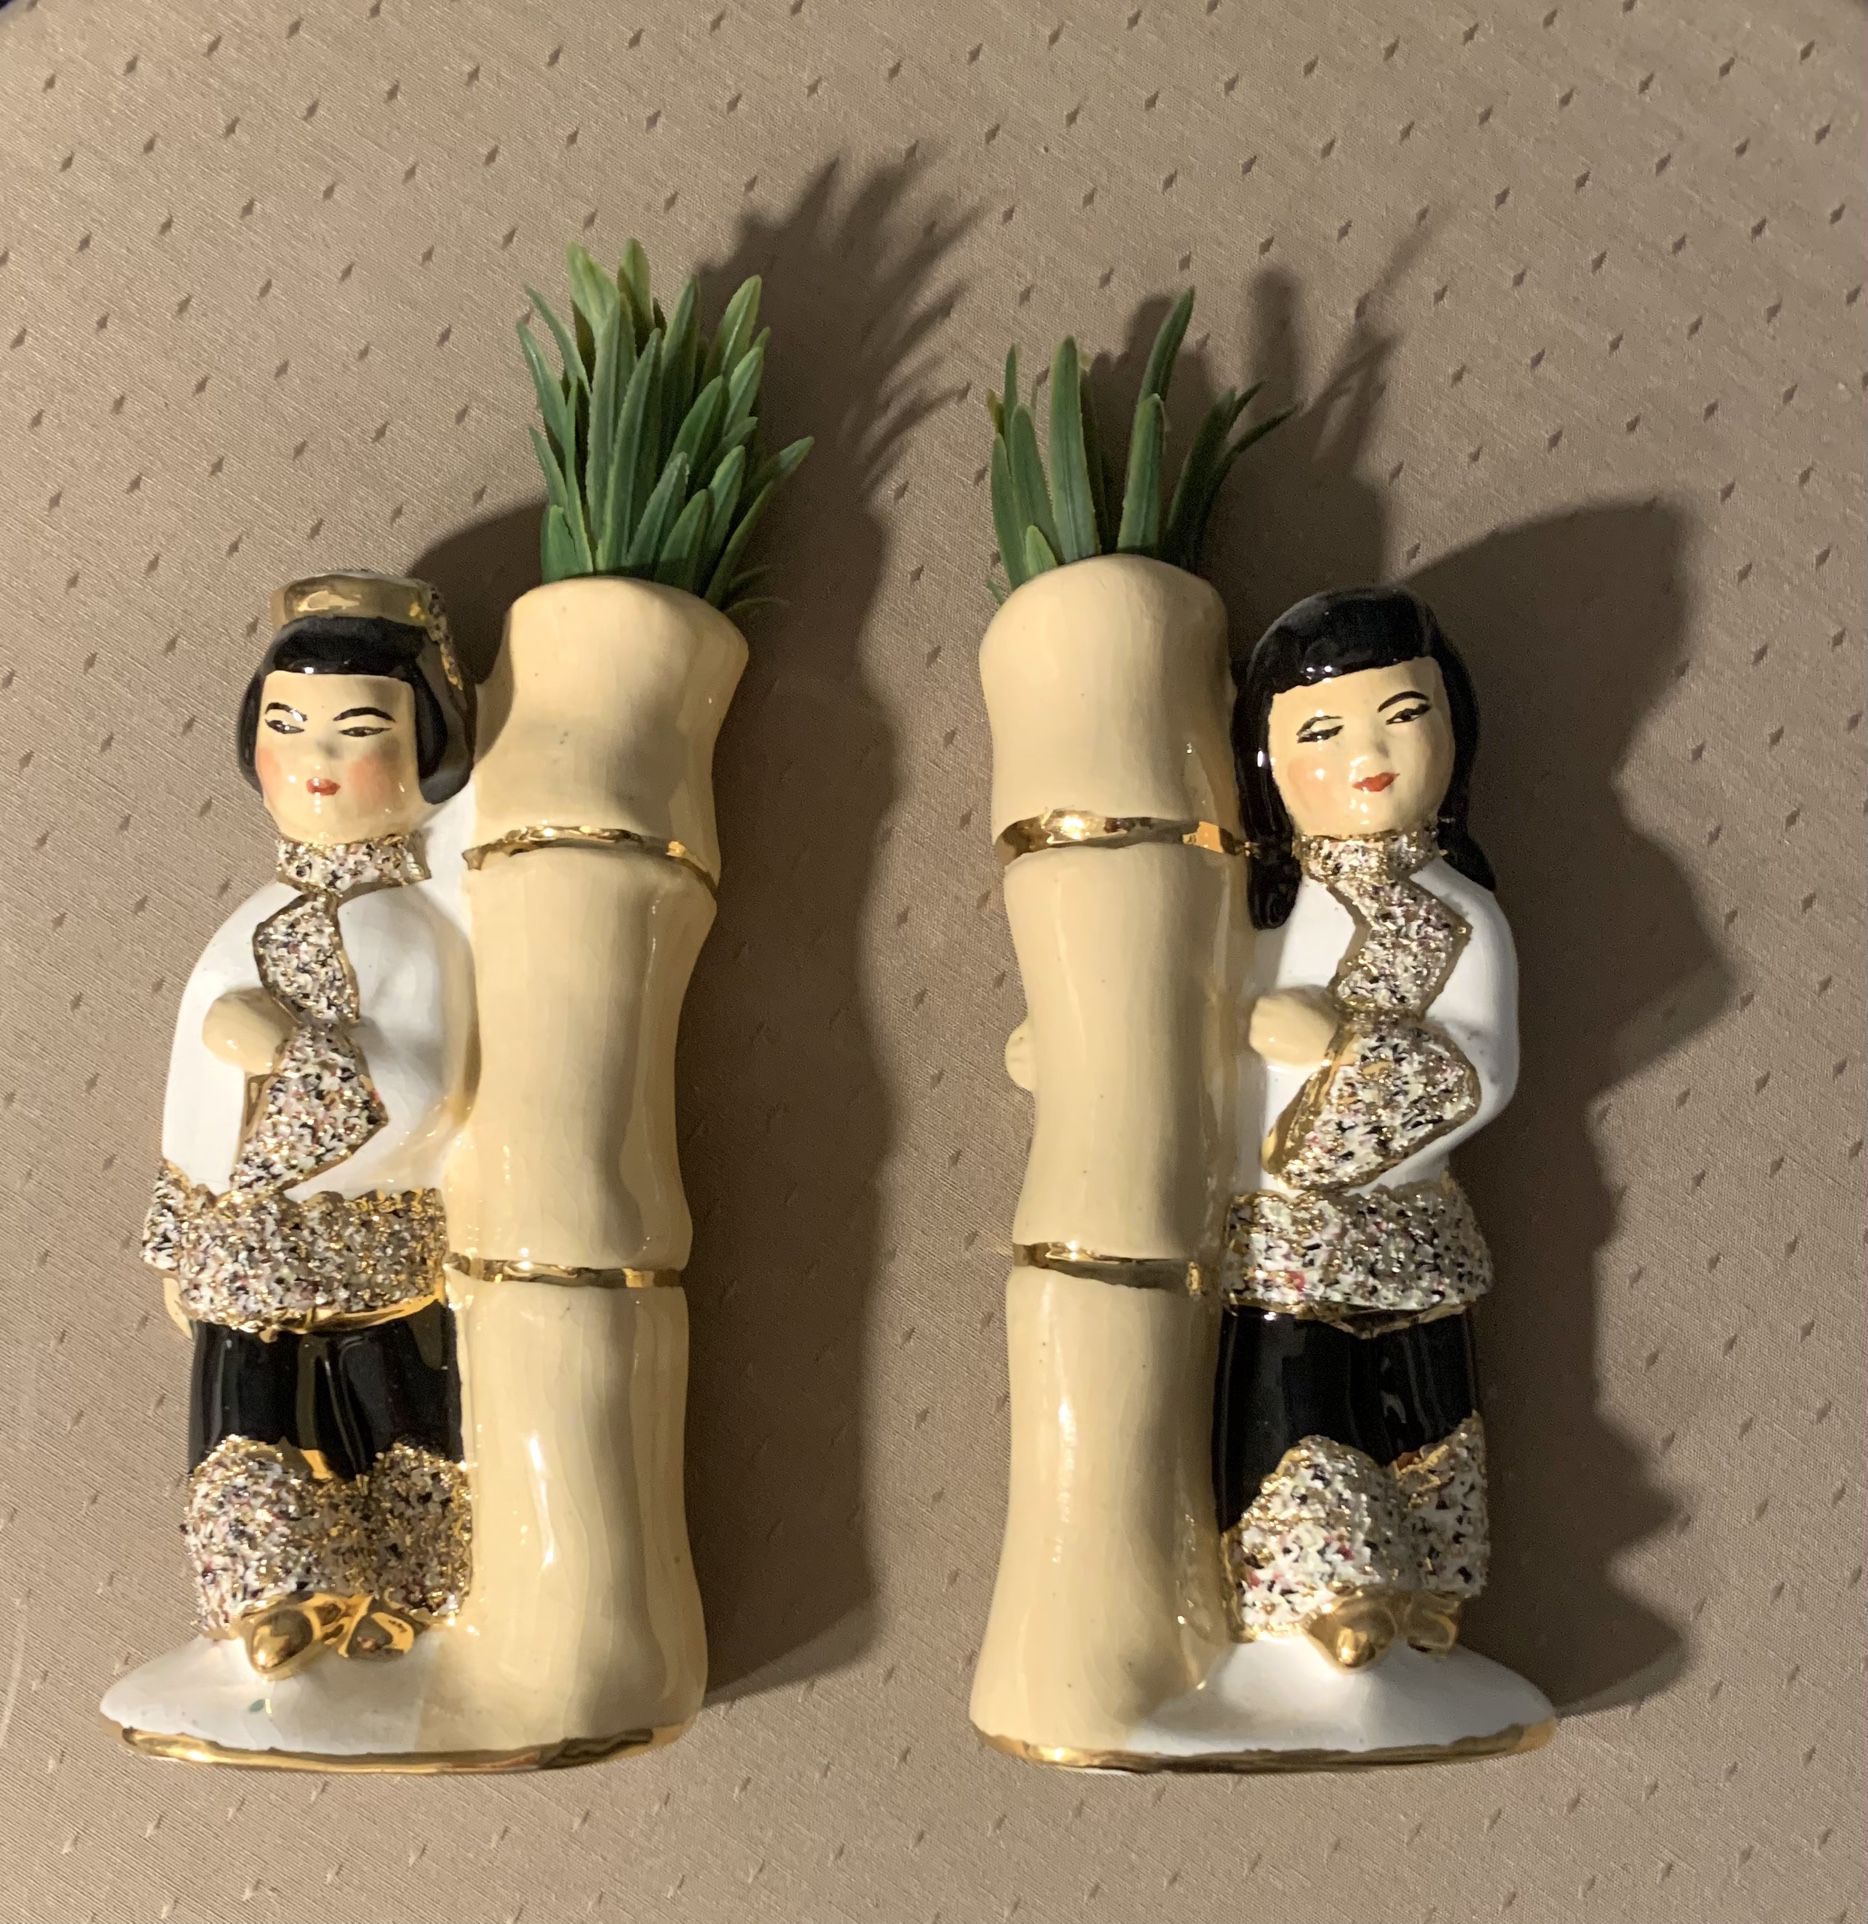 Vintage Japanese Figures with Bamboo